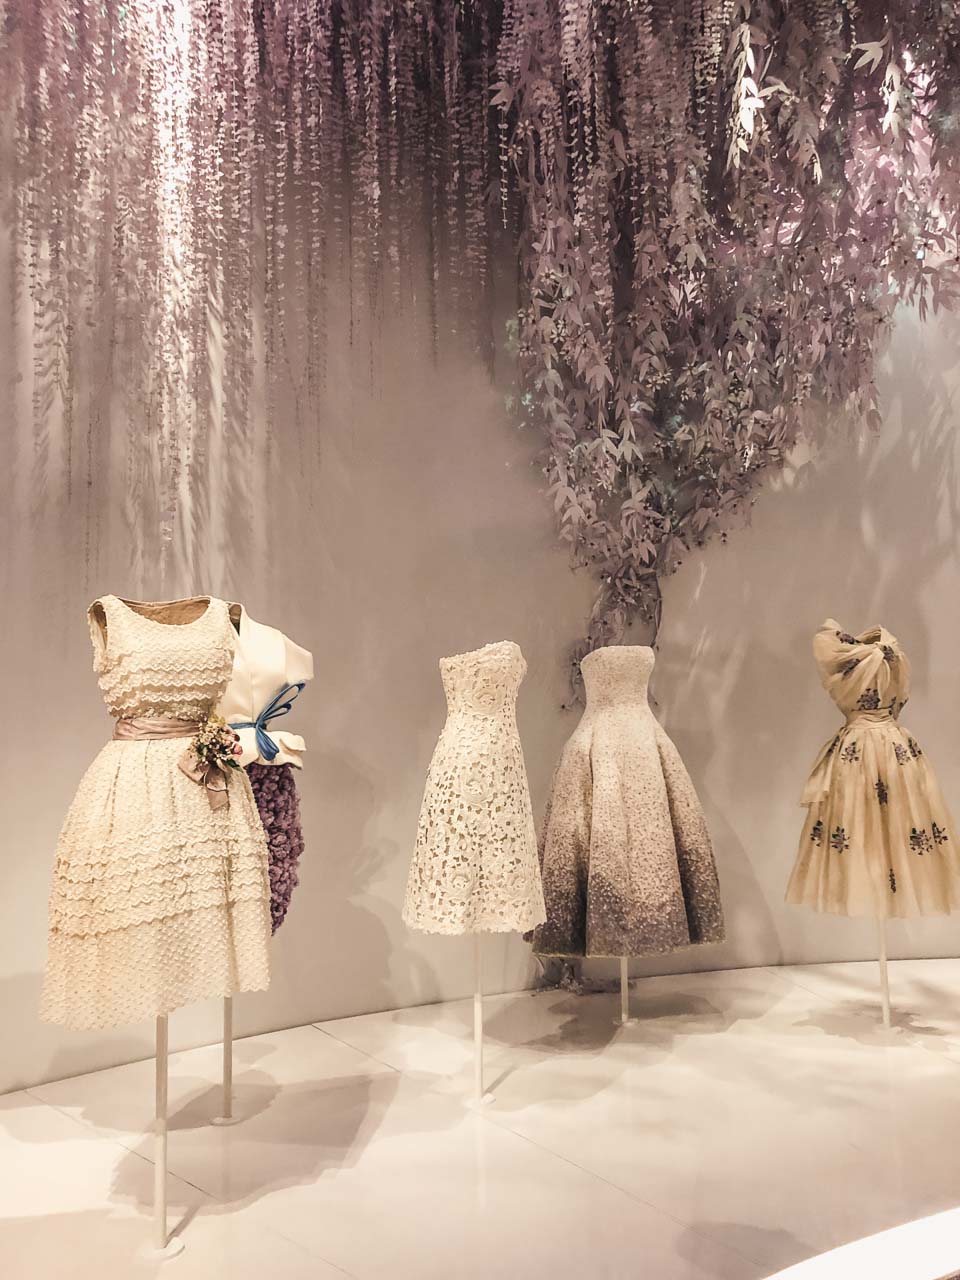 Dior gowns on display in the garden room of the Dior exhibition at the Victoria and Albert Museum